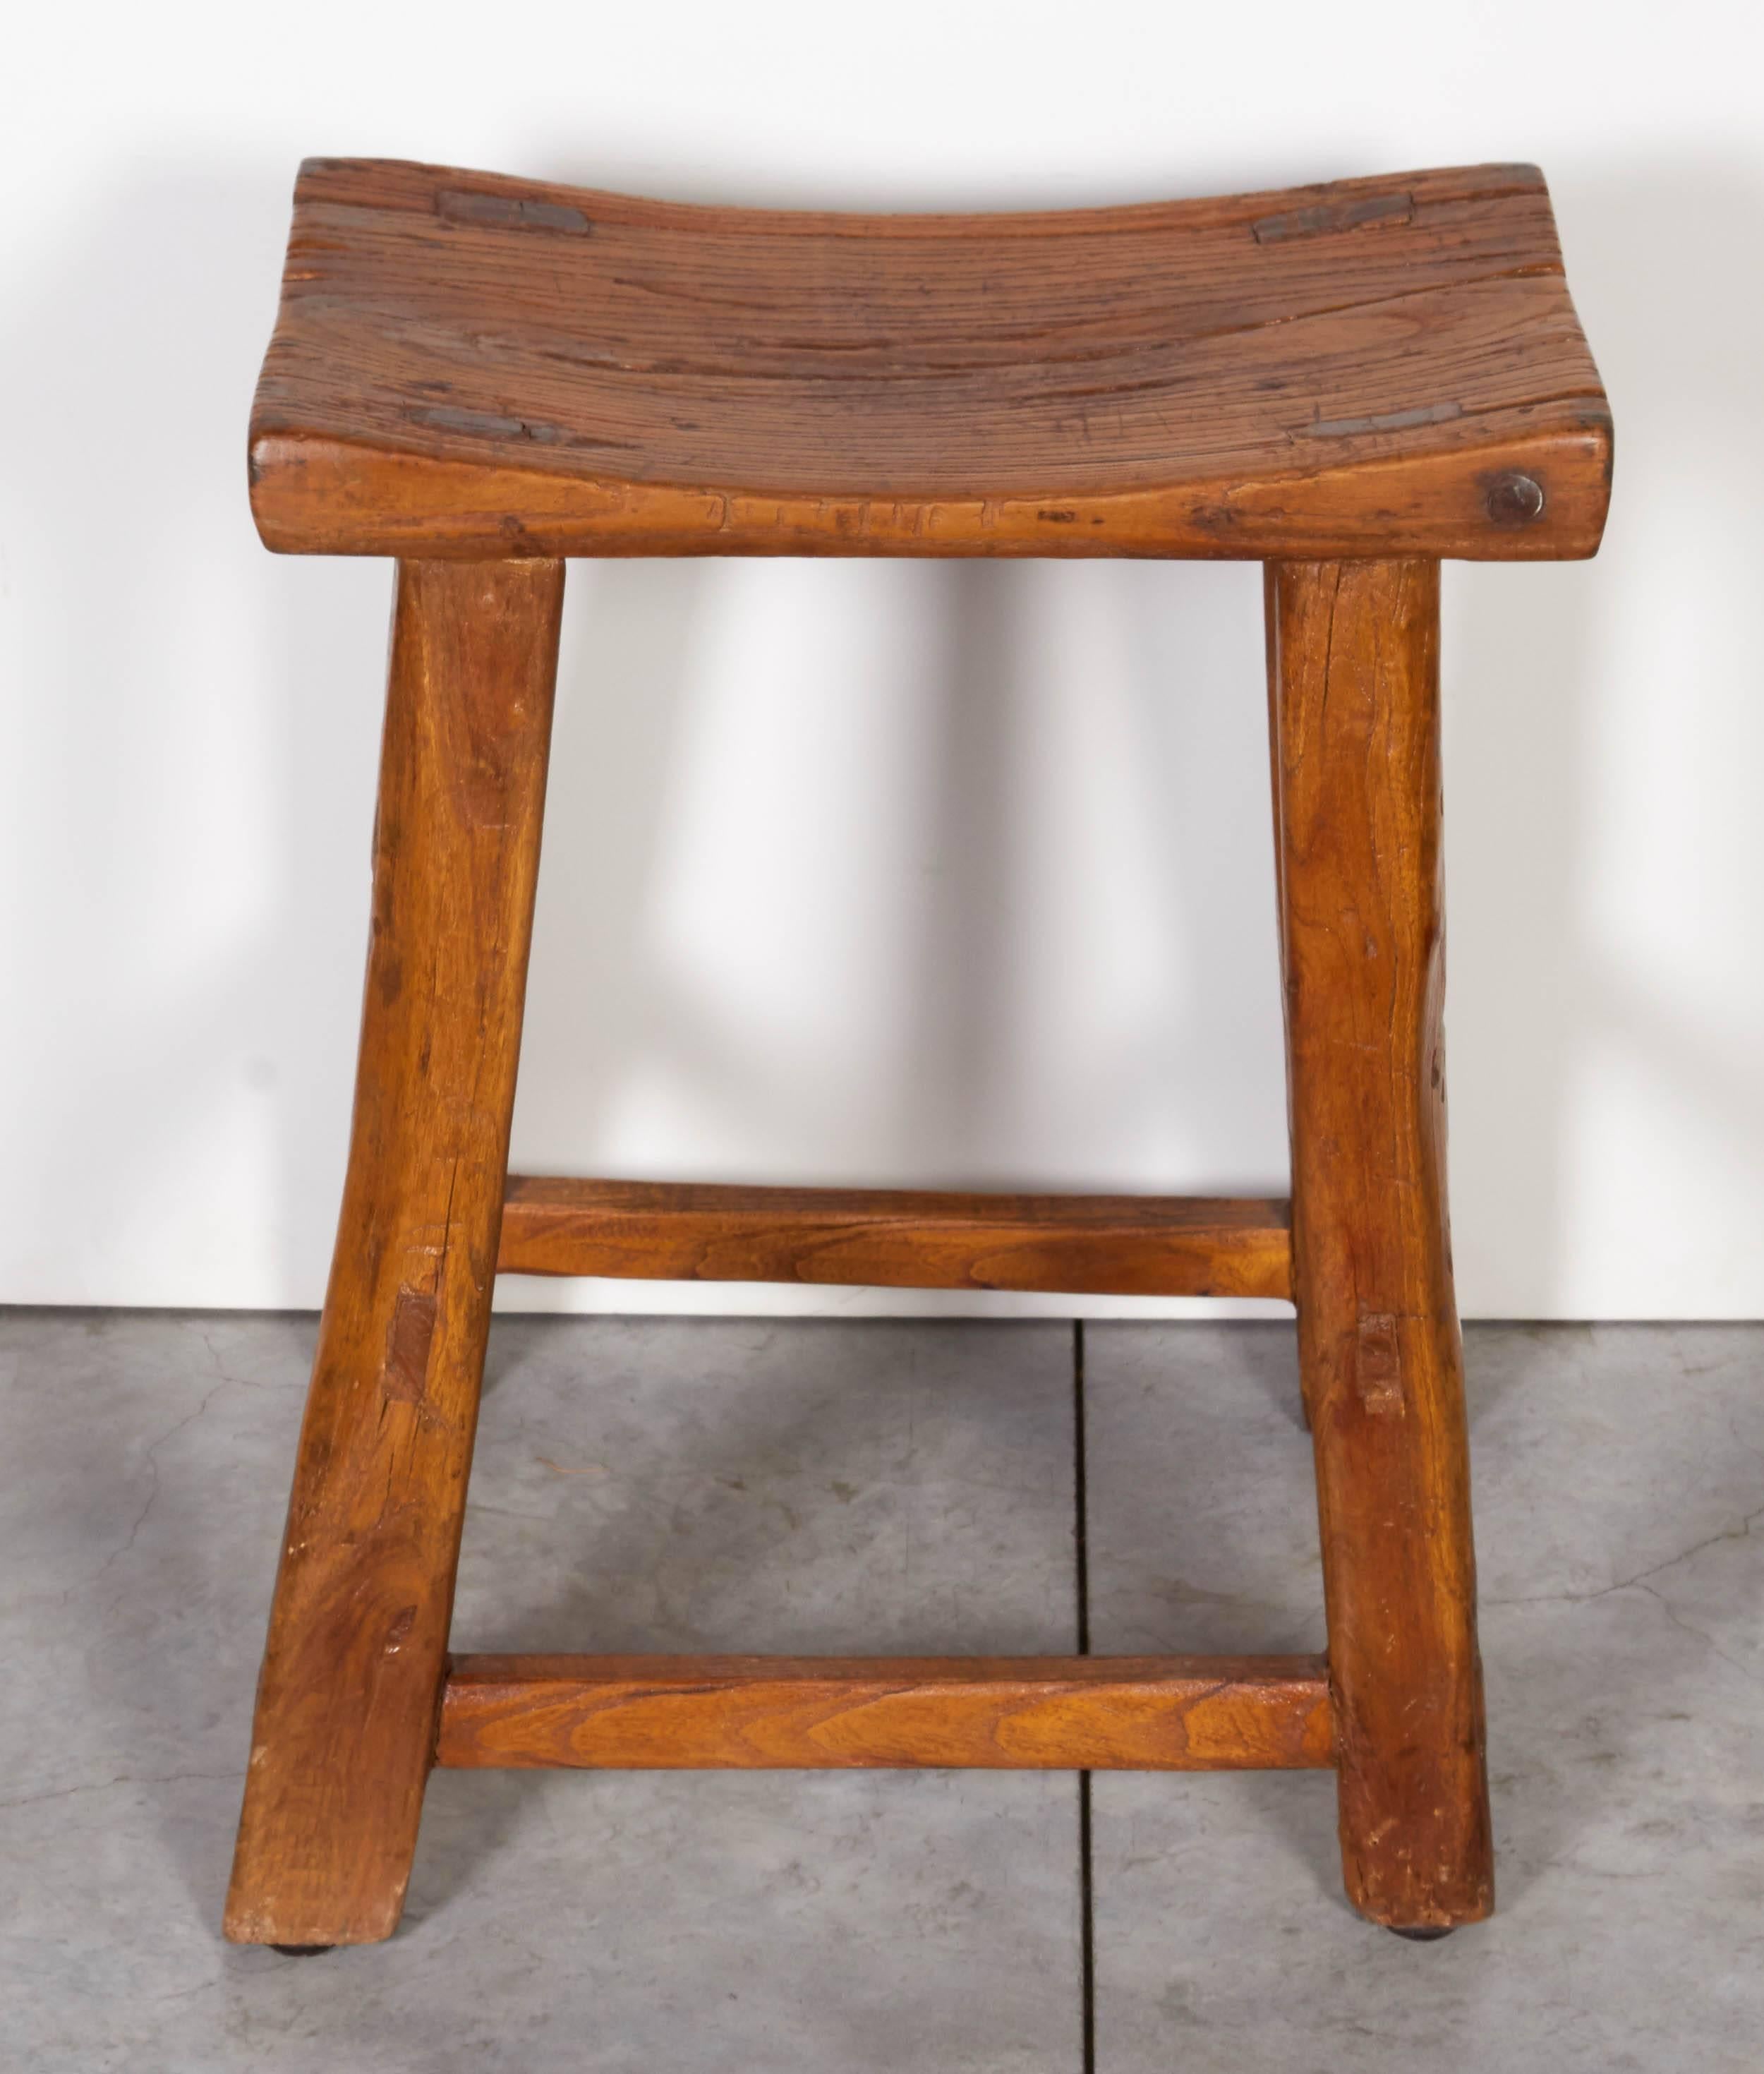 Classic Antique Chinese Stool 1